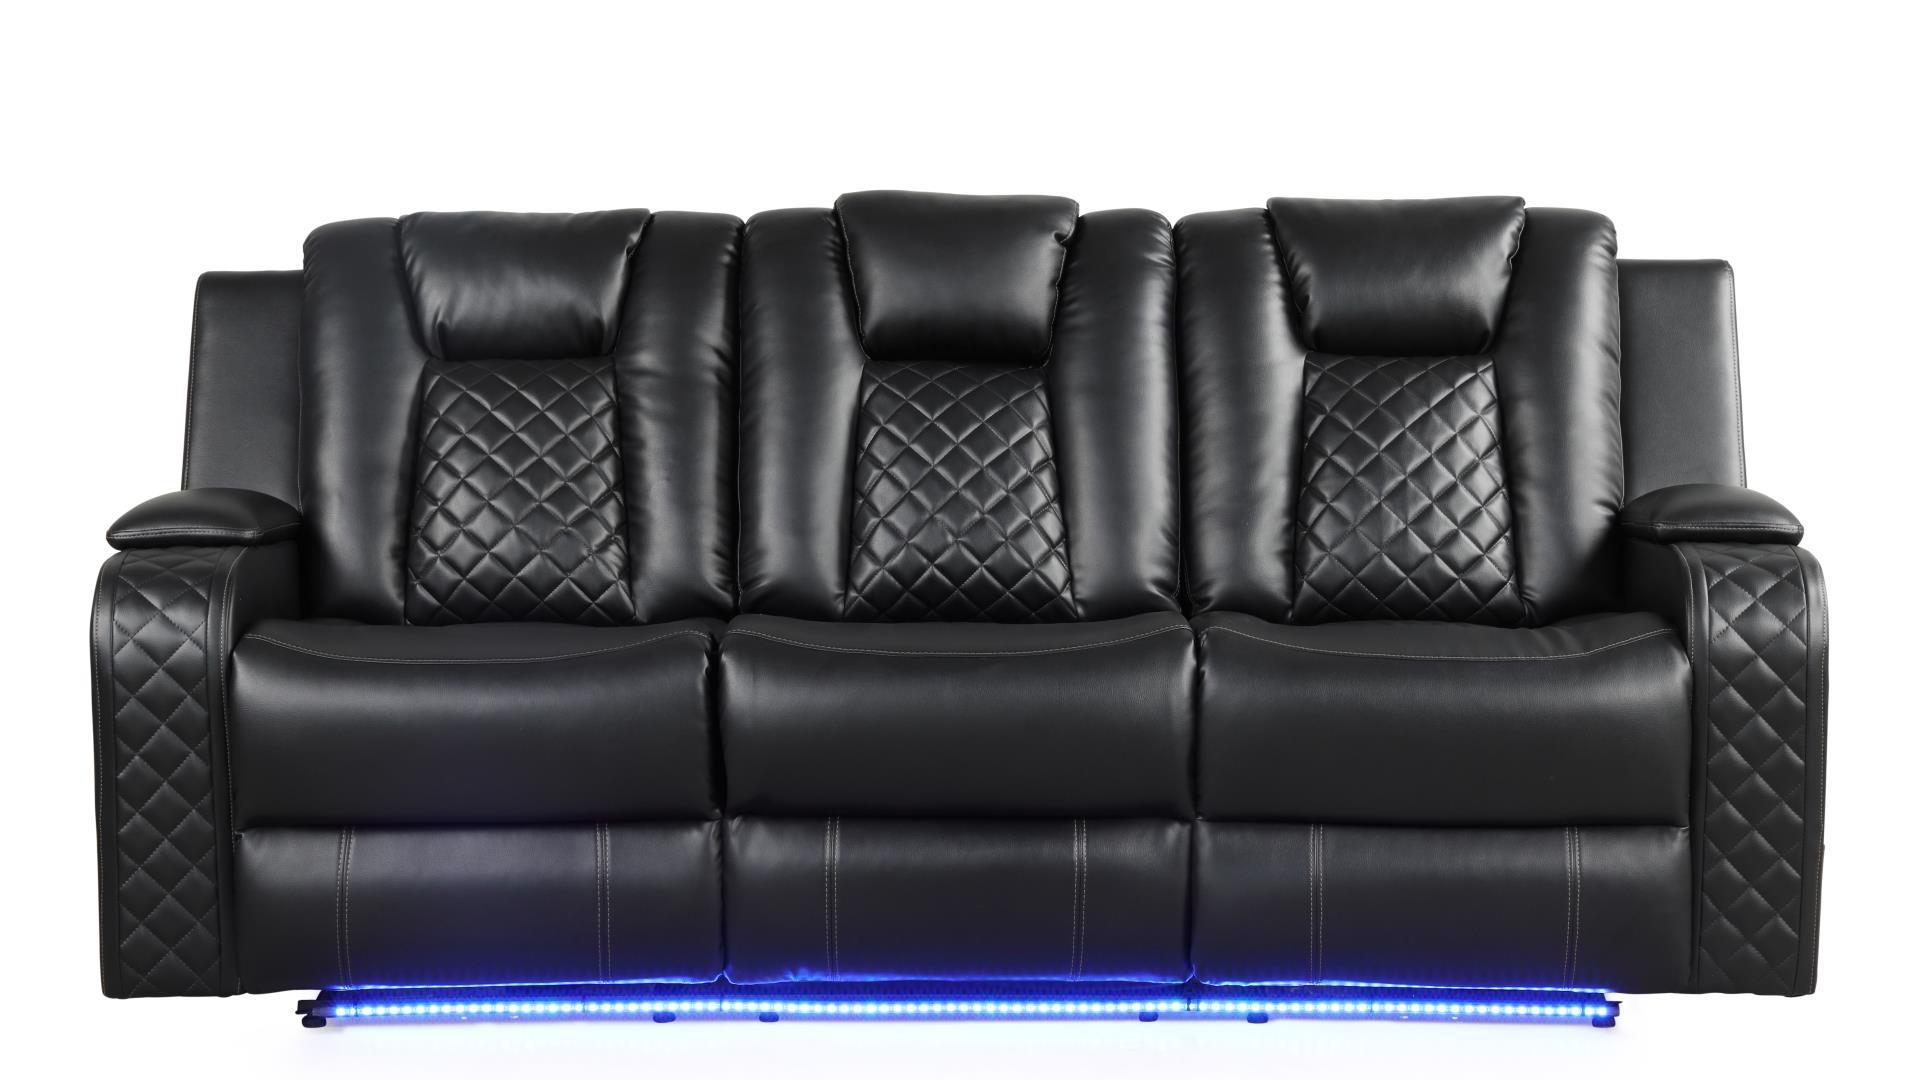 Contemporary, Modern Recliner Sofa BENZ Black BENZ-BK-S in Black Faux Leather